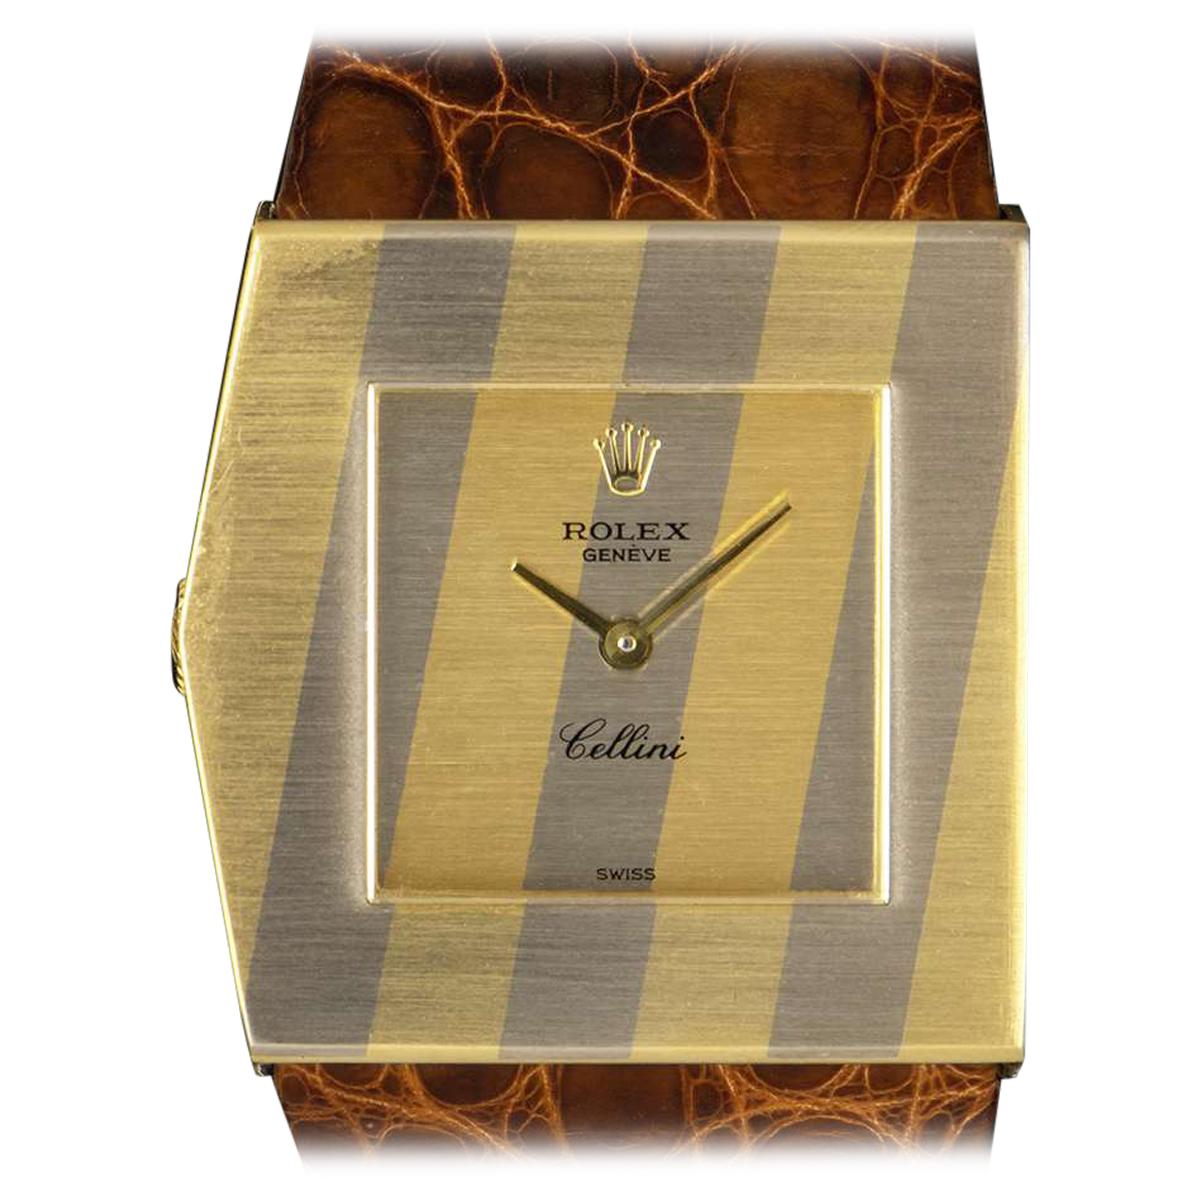 Rolex Striped King Midas Left-Handed Cellini Gold 4912 Manual Wind Watch